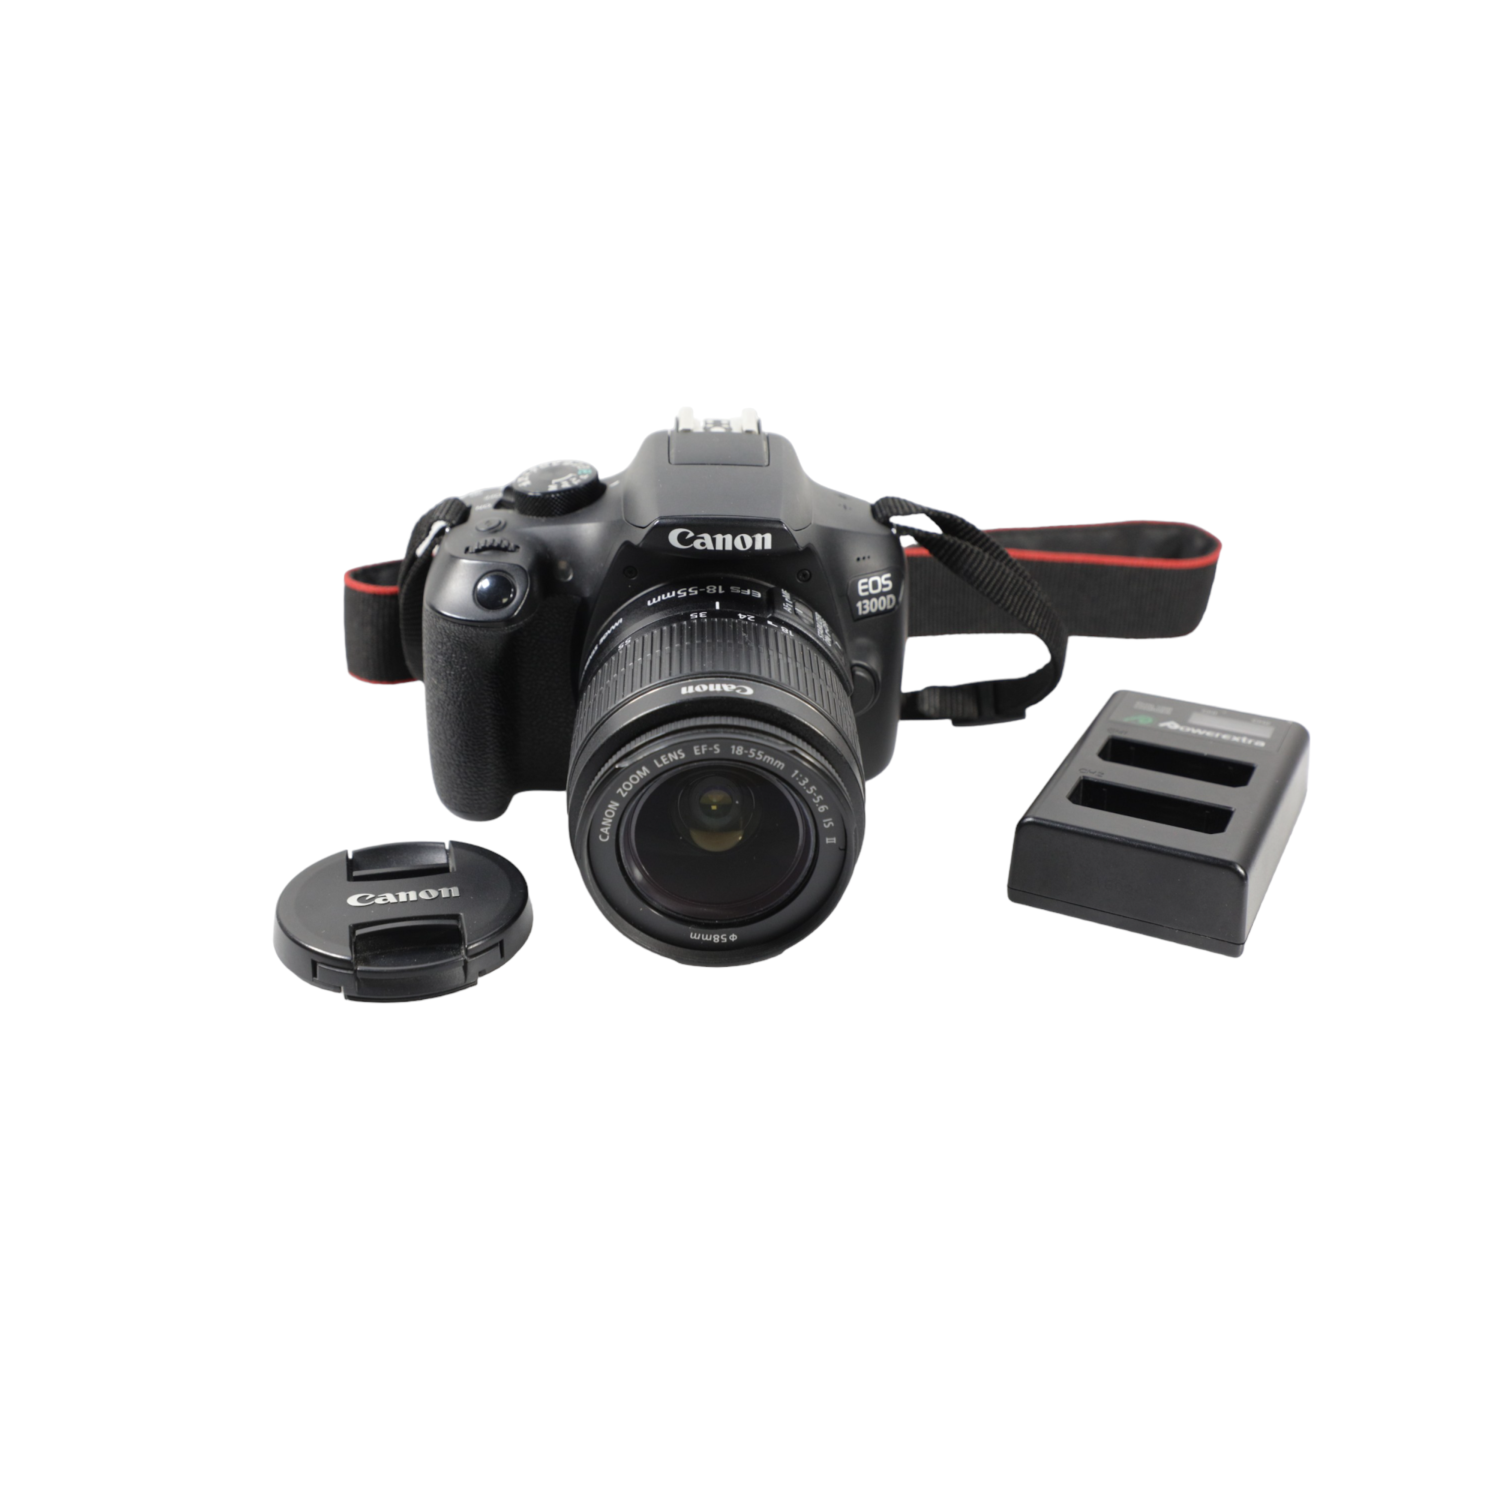 Refurbished(Good) - Canon EOS Rebel T6 DSLR Camera with Canon EF-S 18-55mm f/3.5-5.6 is II Lens